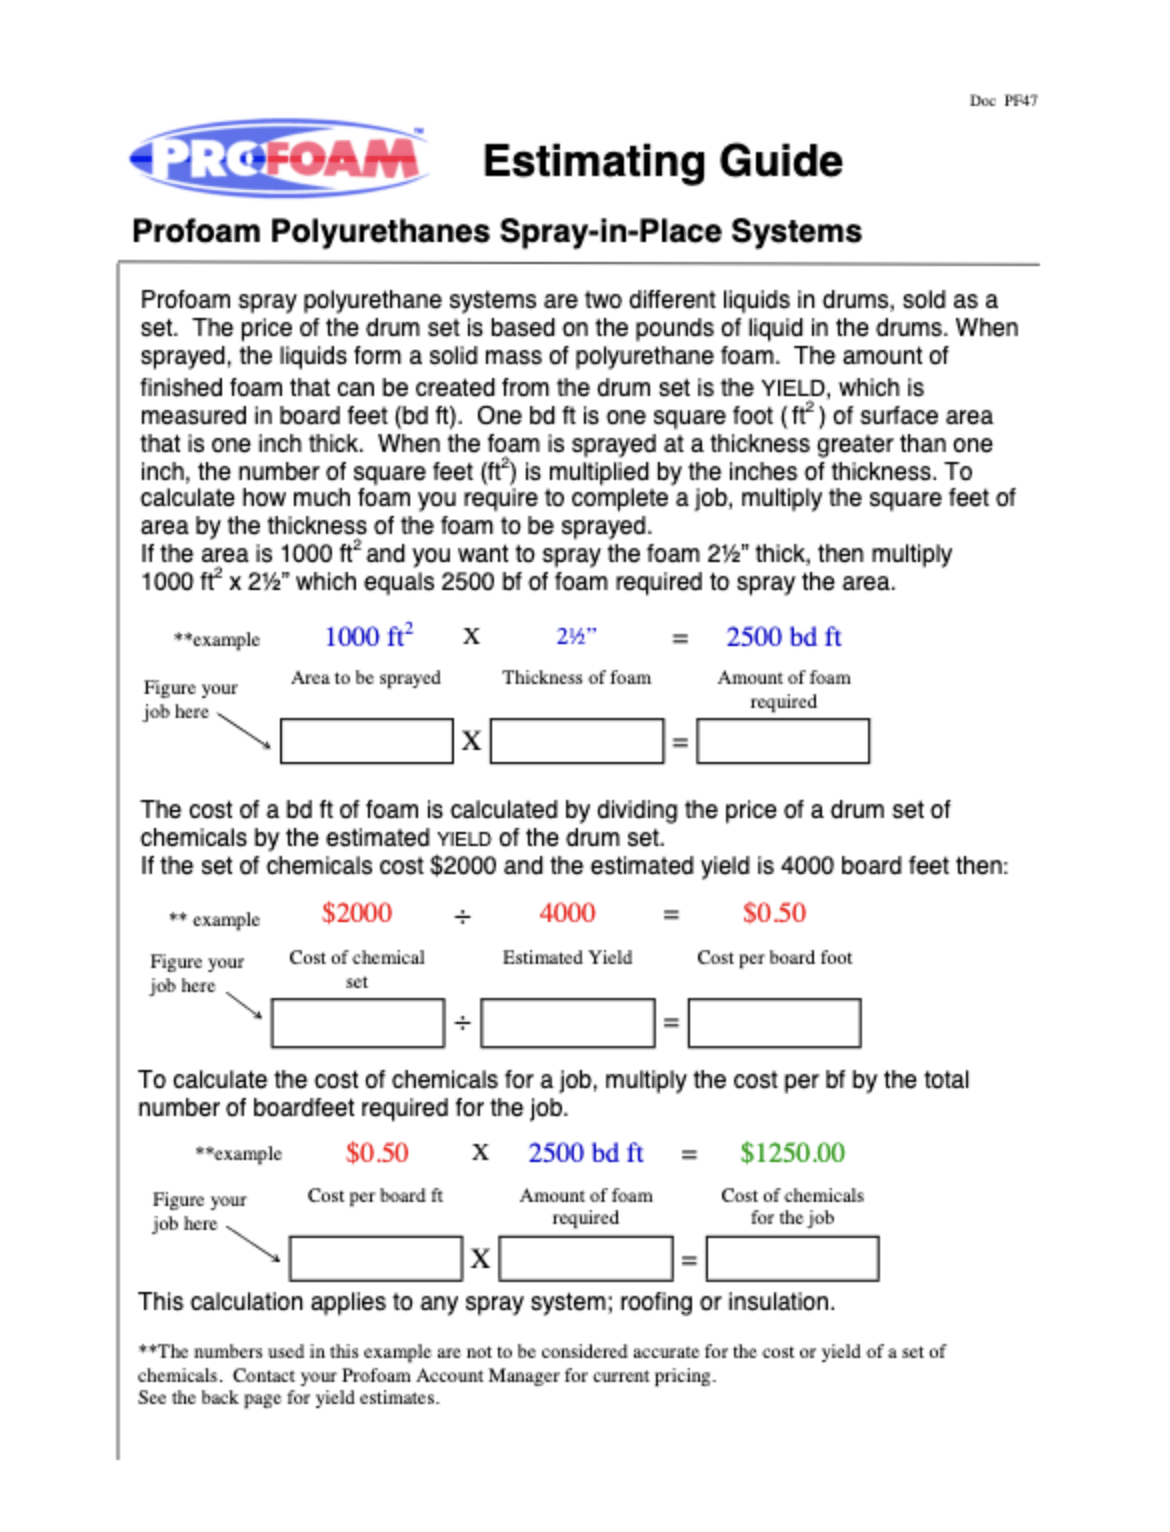 11-Estimating Guide for Profoam Spray-in-Place Polyurethane Systems 050515